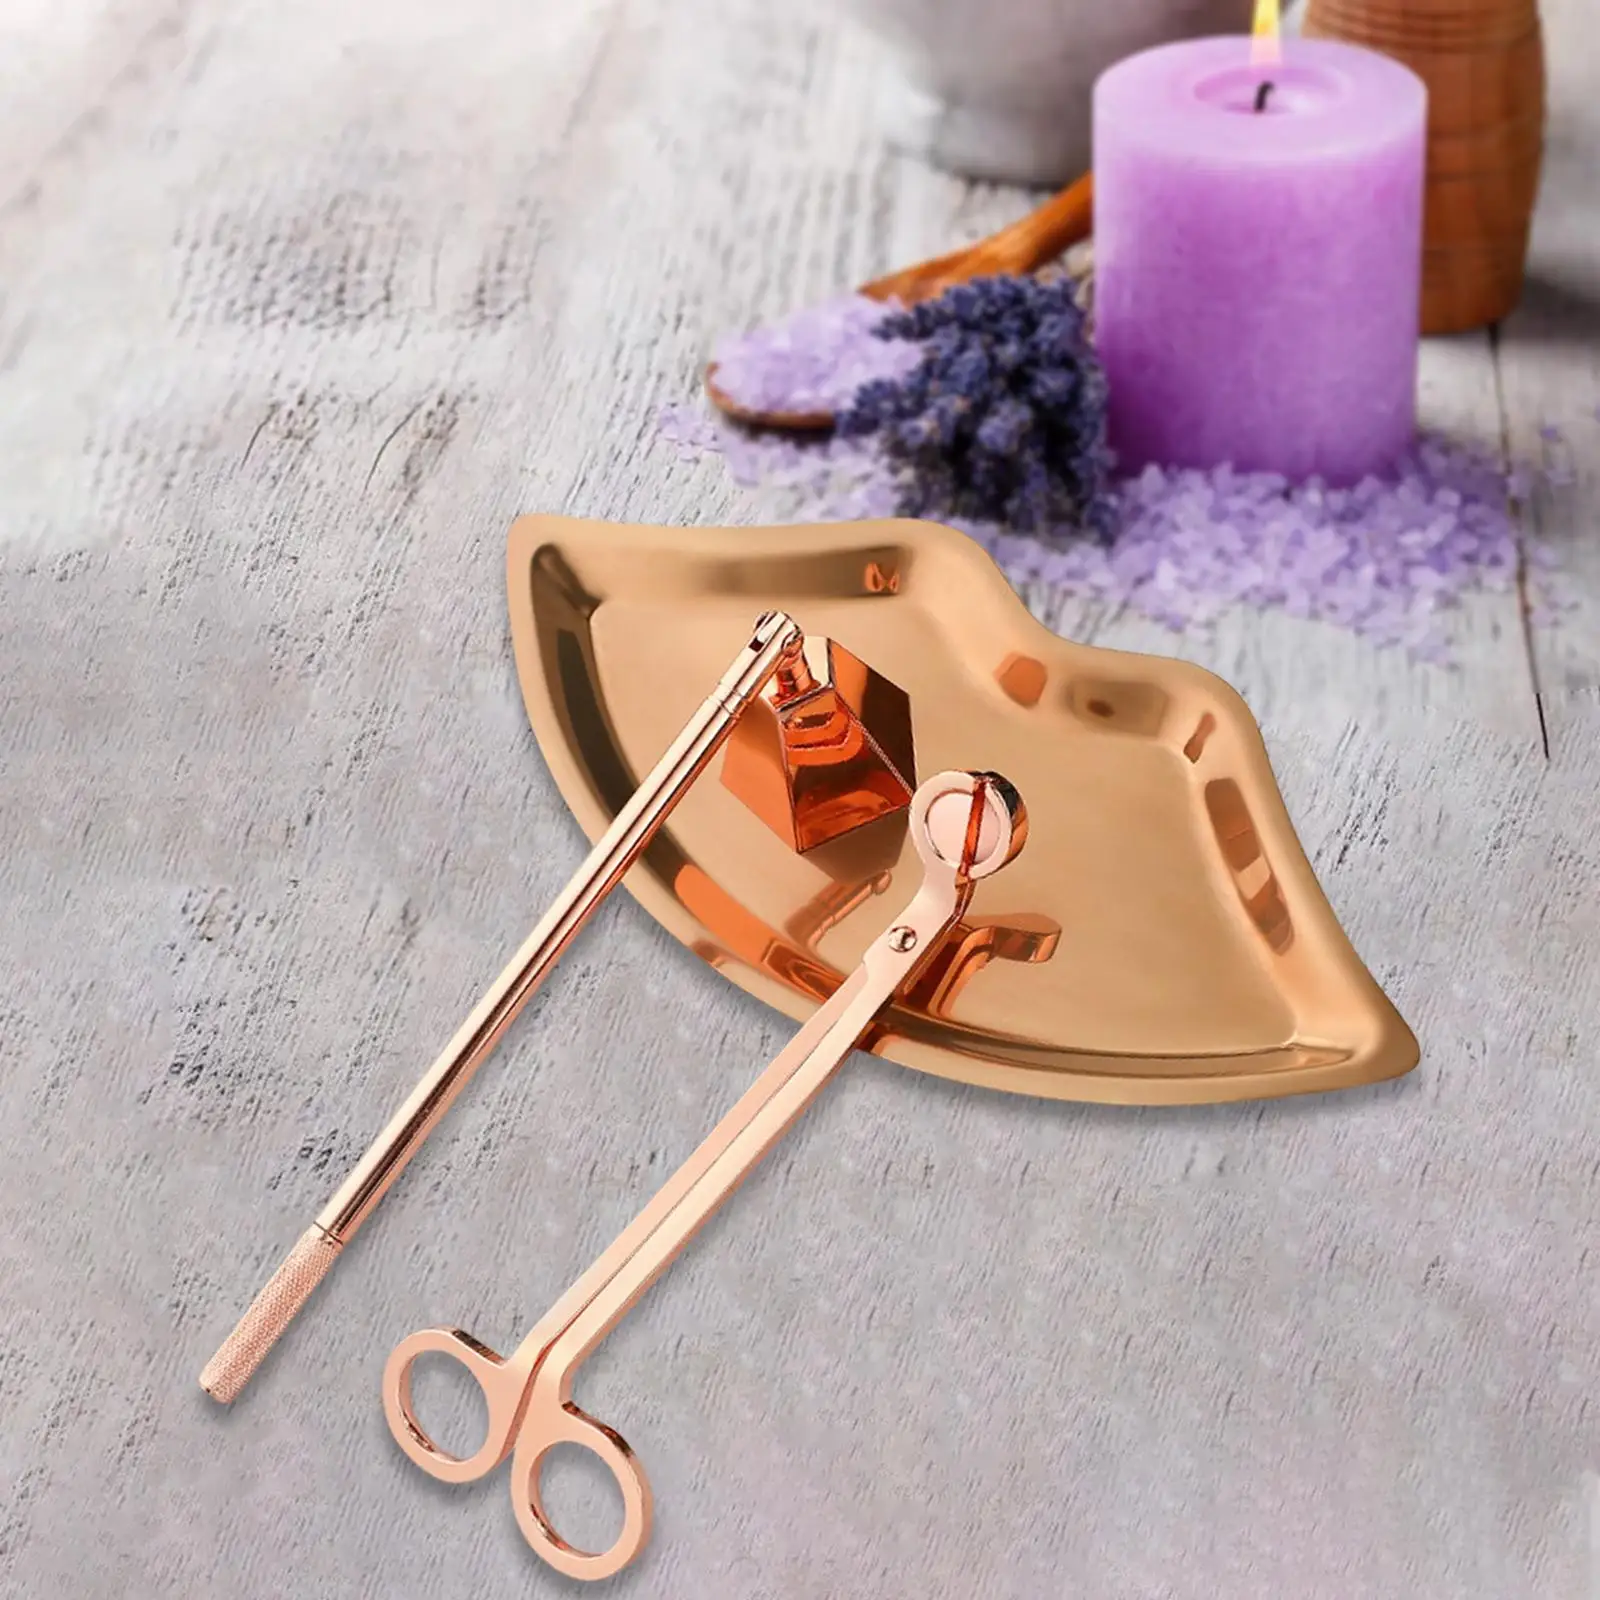 Candle Accessory Set Wick Trimmer Candle Snuffer Tray for Putting Out Candles Flame Safely Thanksgiving Christmas Pillar Candle